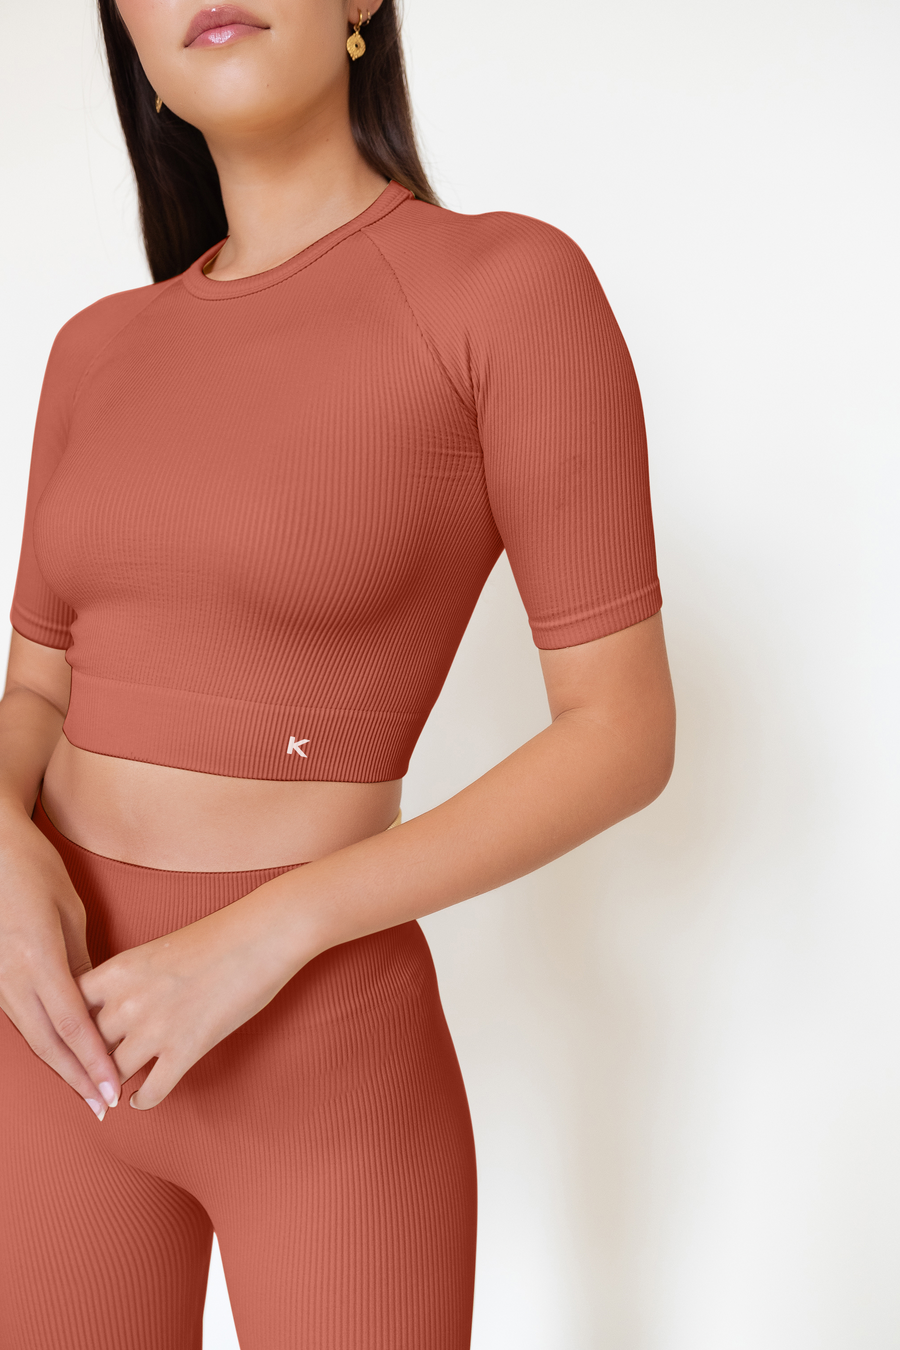 This short sleeve orange crop top is seamless, ribbed and sustainable. 